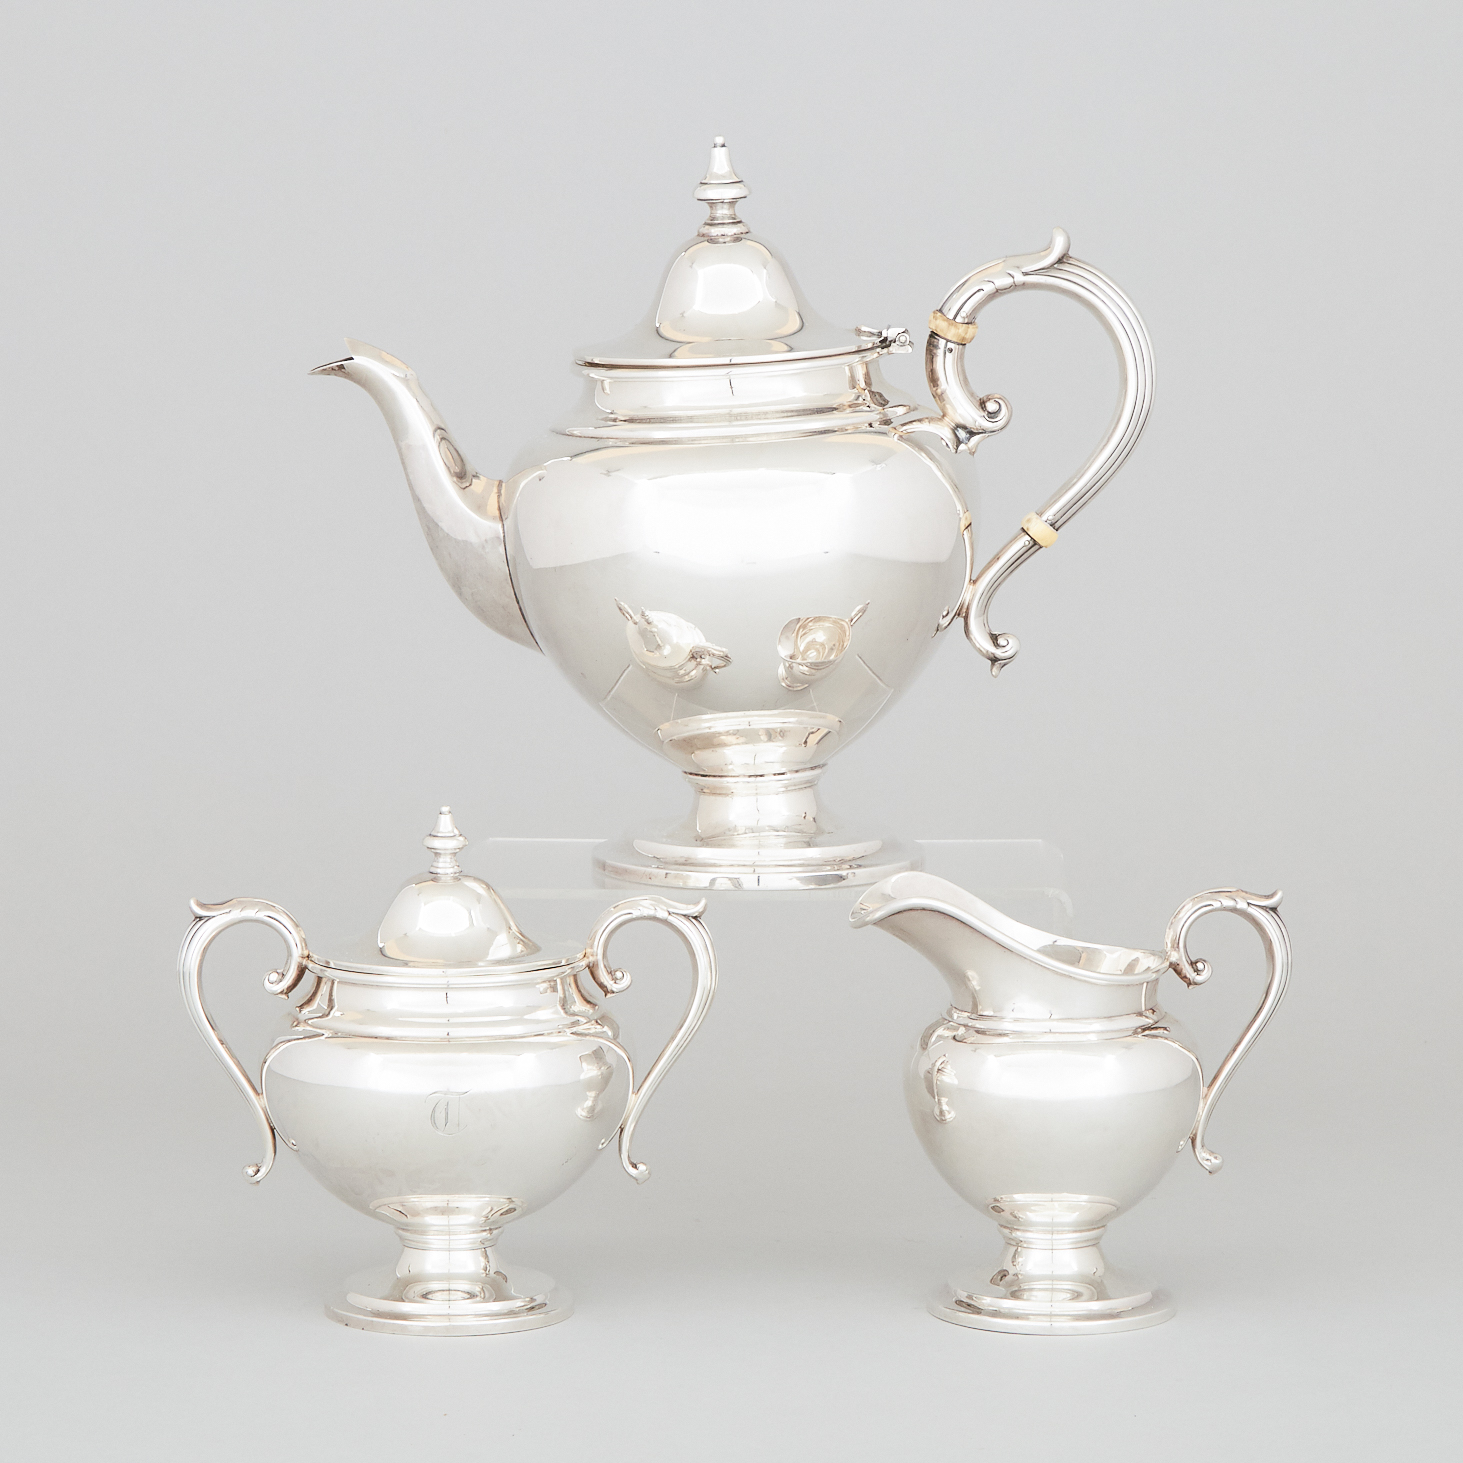 Canadian Silver Tea Service, Henry Birks & Sons, Montreal, Que., 1947